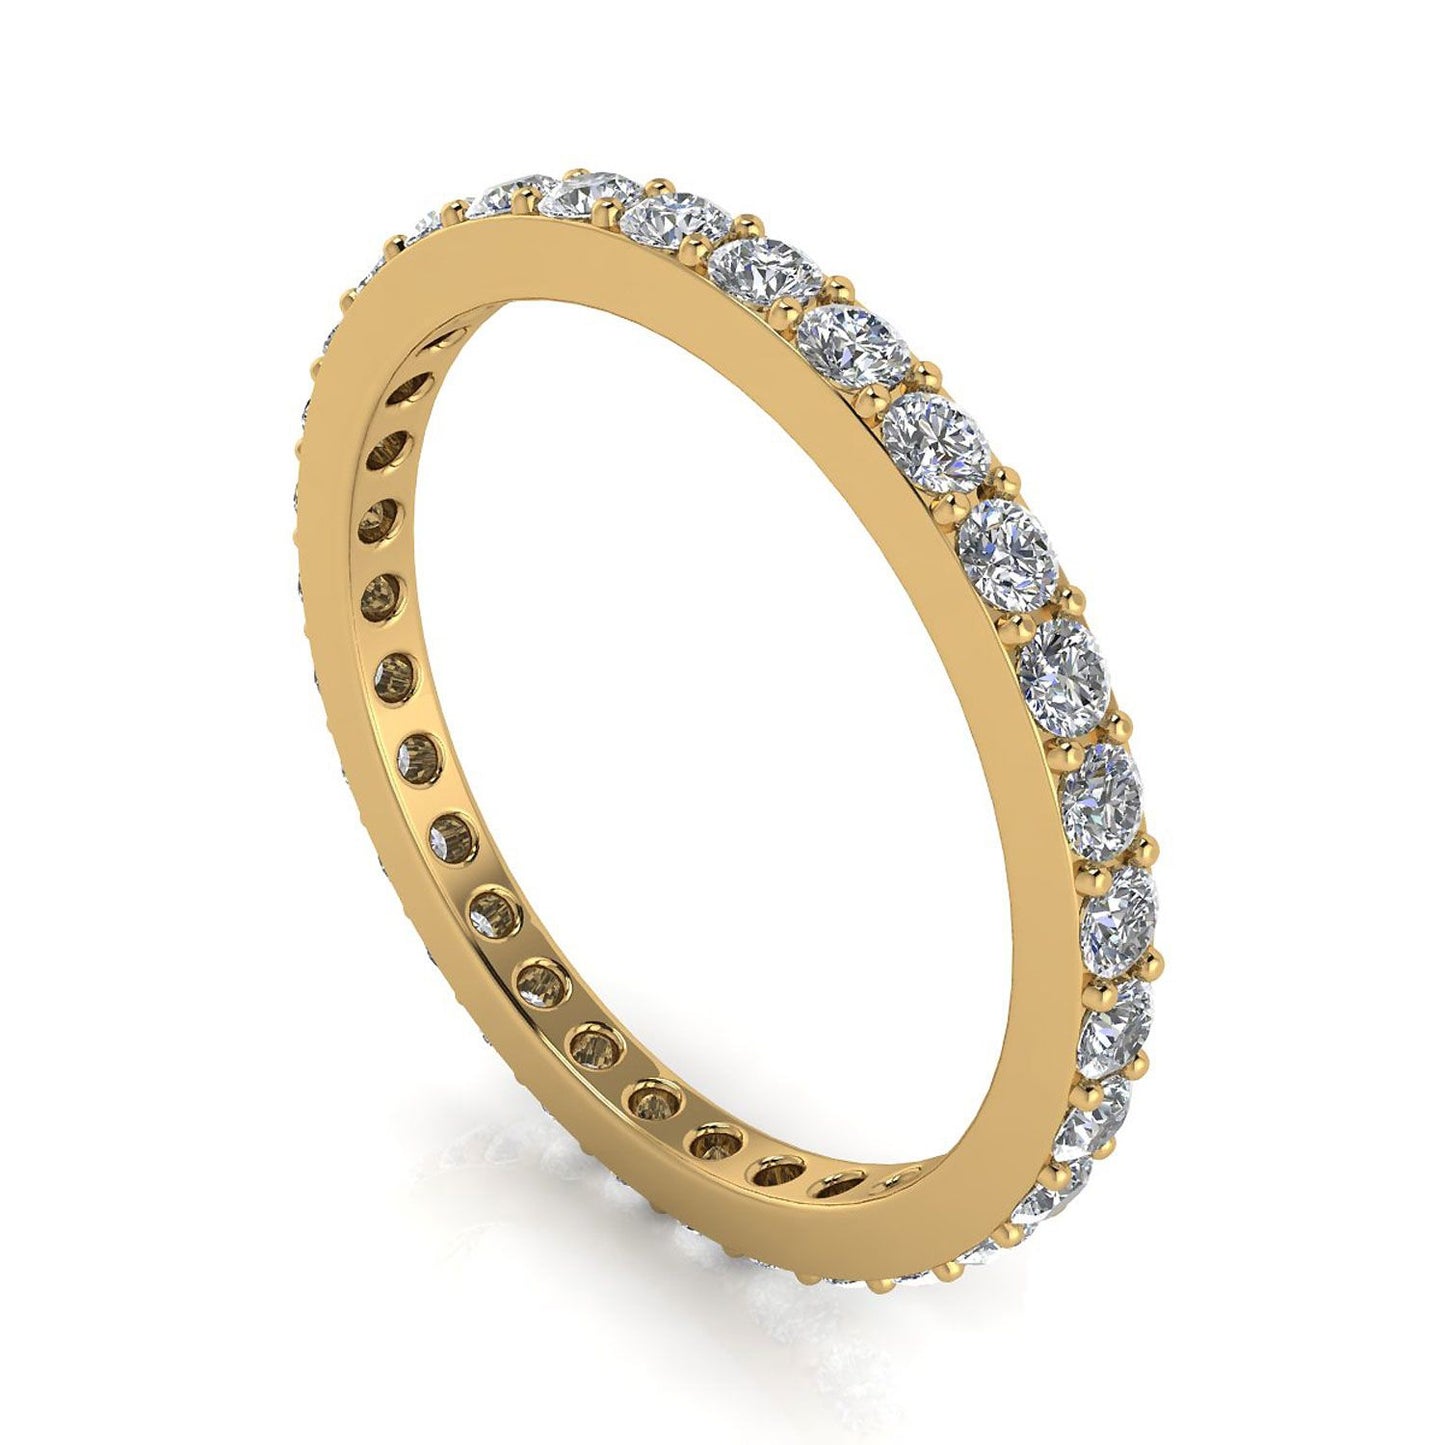 Round Brilliant Cut Diamond Pave Set Eternity Ring In 18k Yellow Gold  (0.92ct. Tw.) Ring Size 6.5